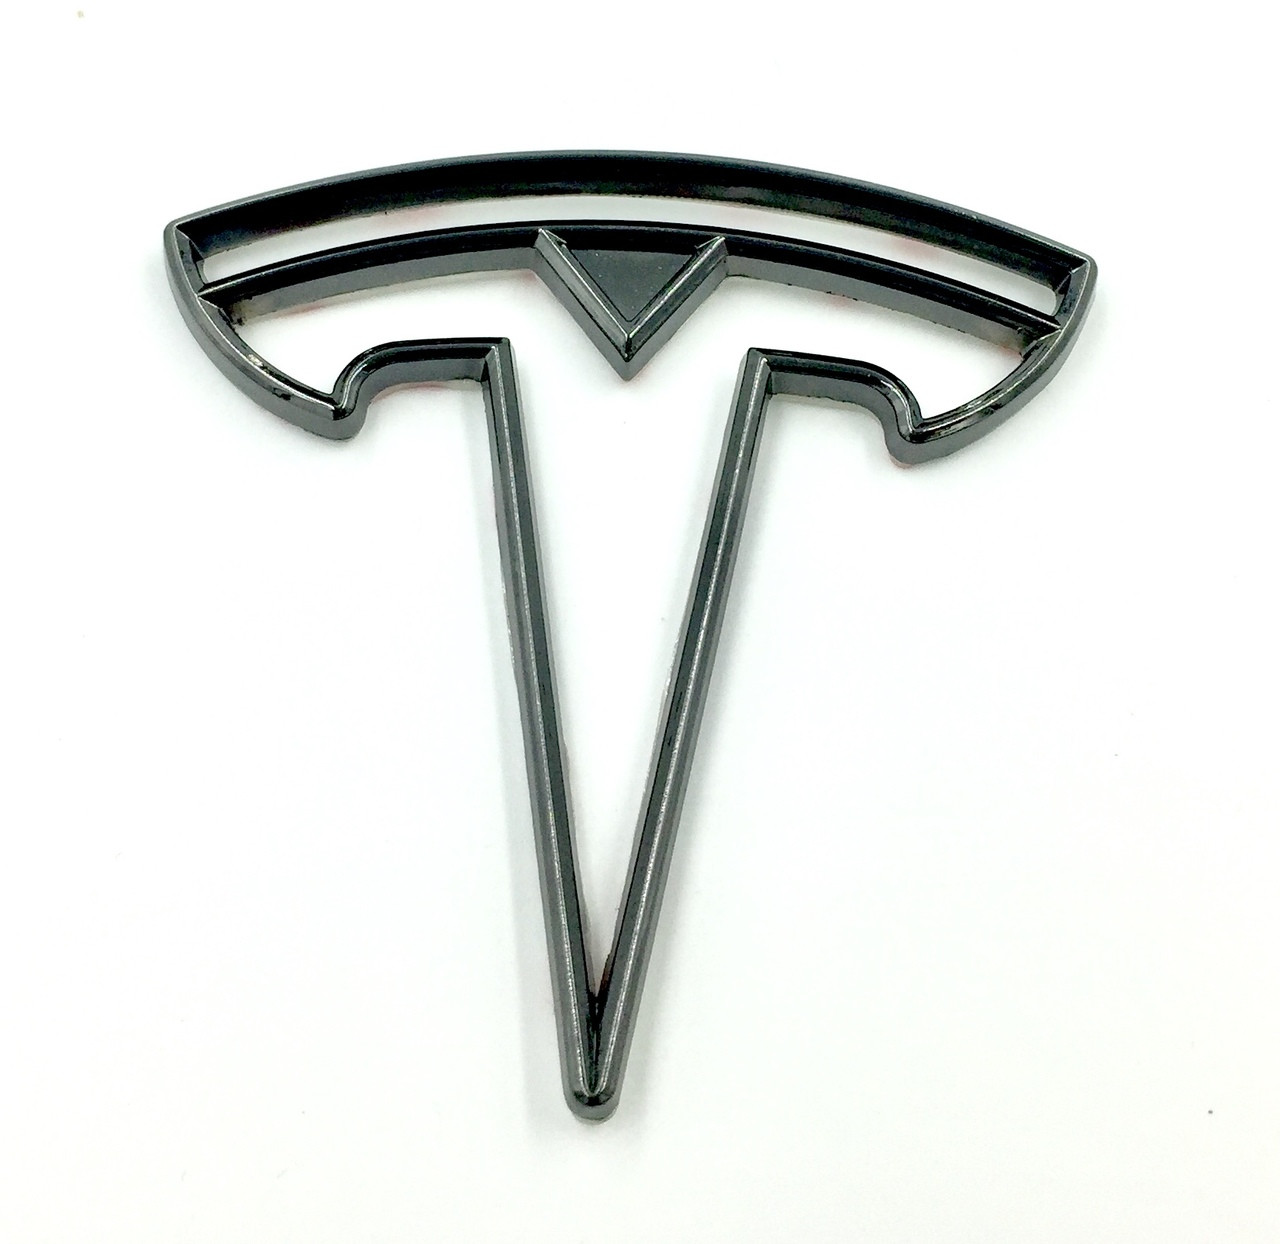 "T" Halo Badge for Model X Rear (6 Colors)